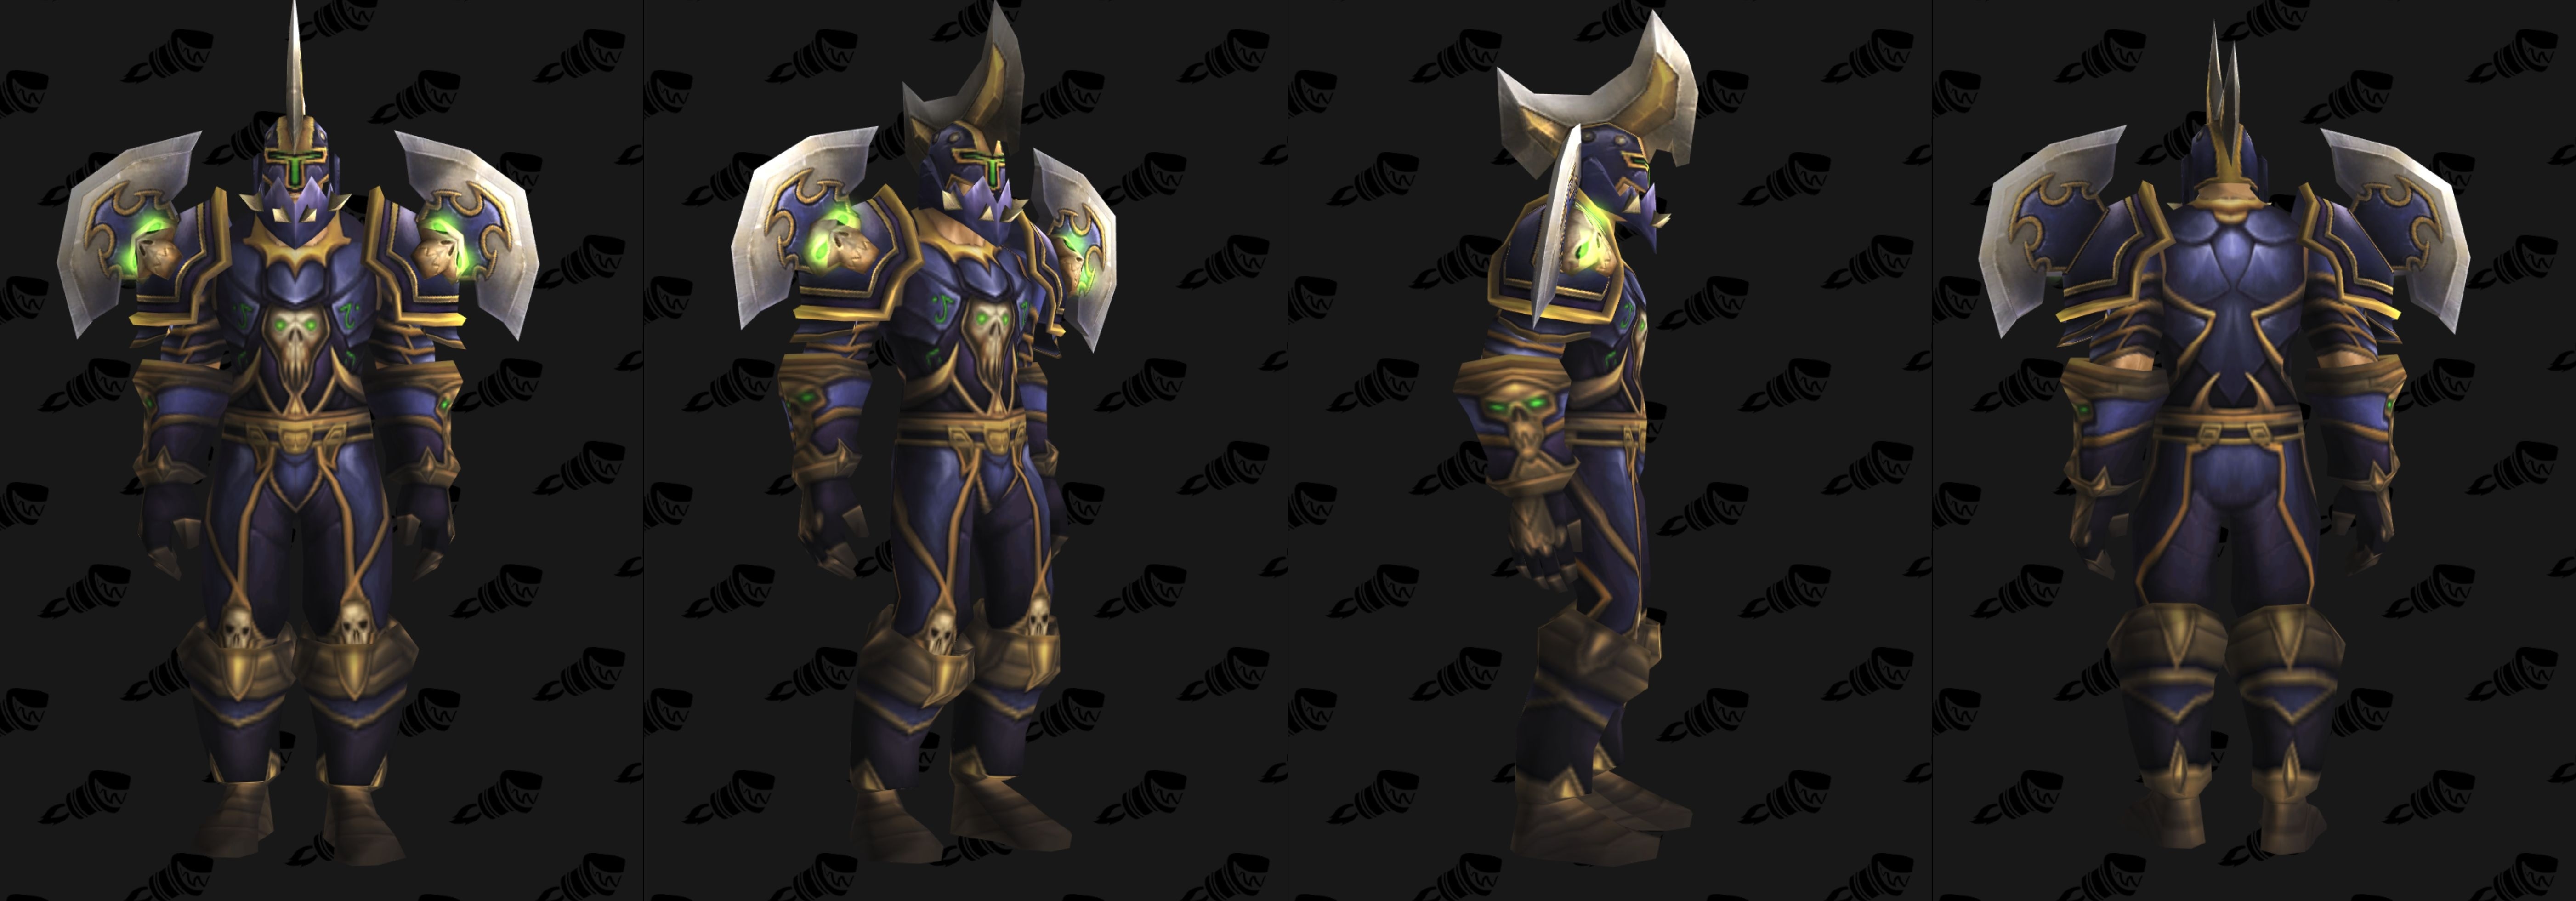 The Tier 2 Set for Warriors is called. 